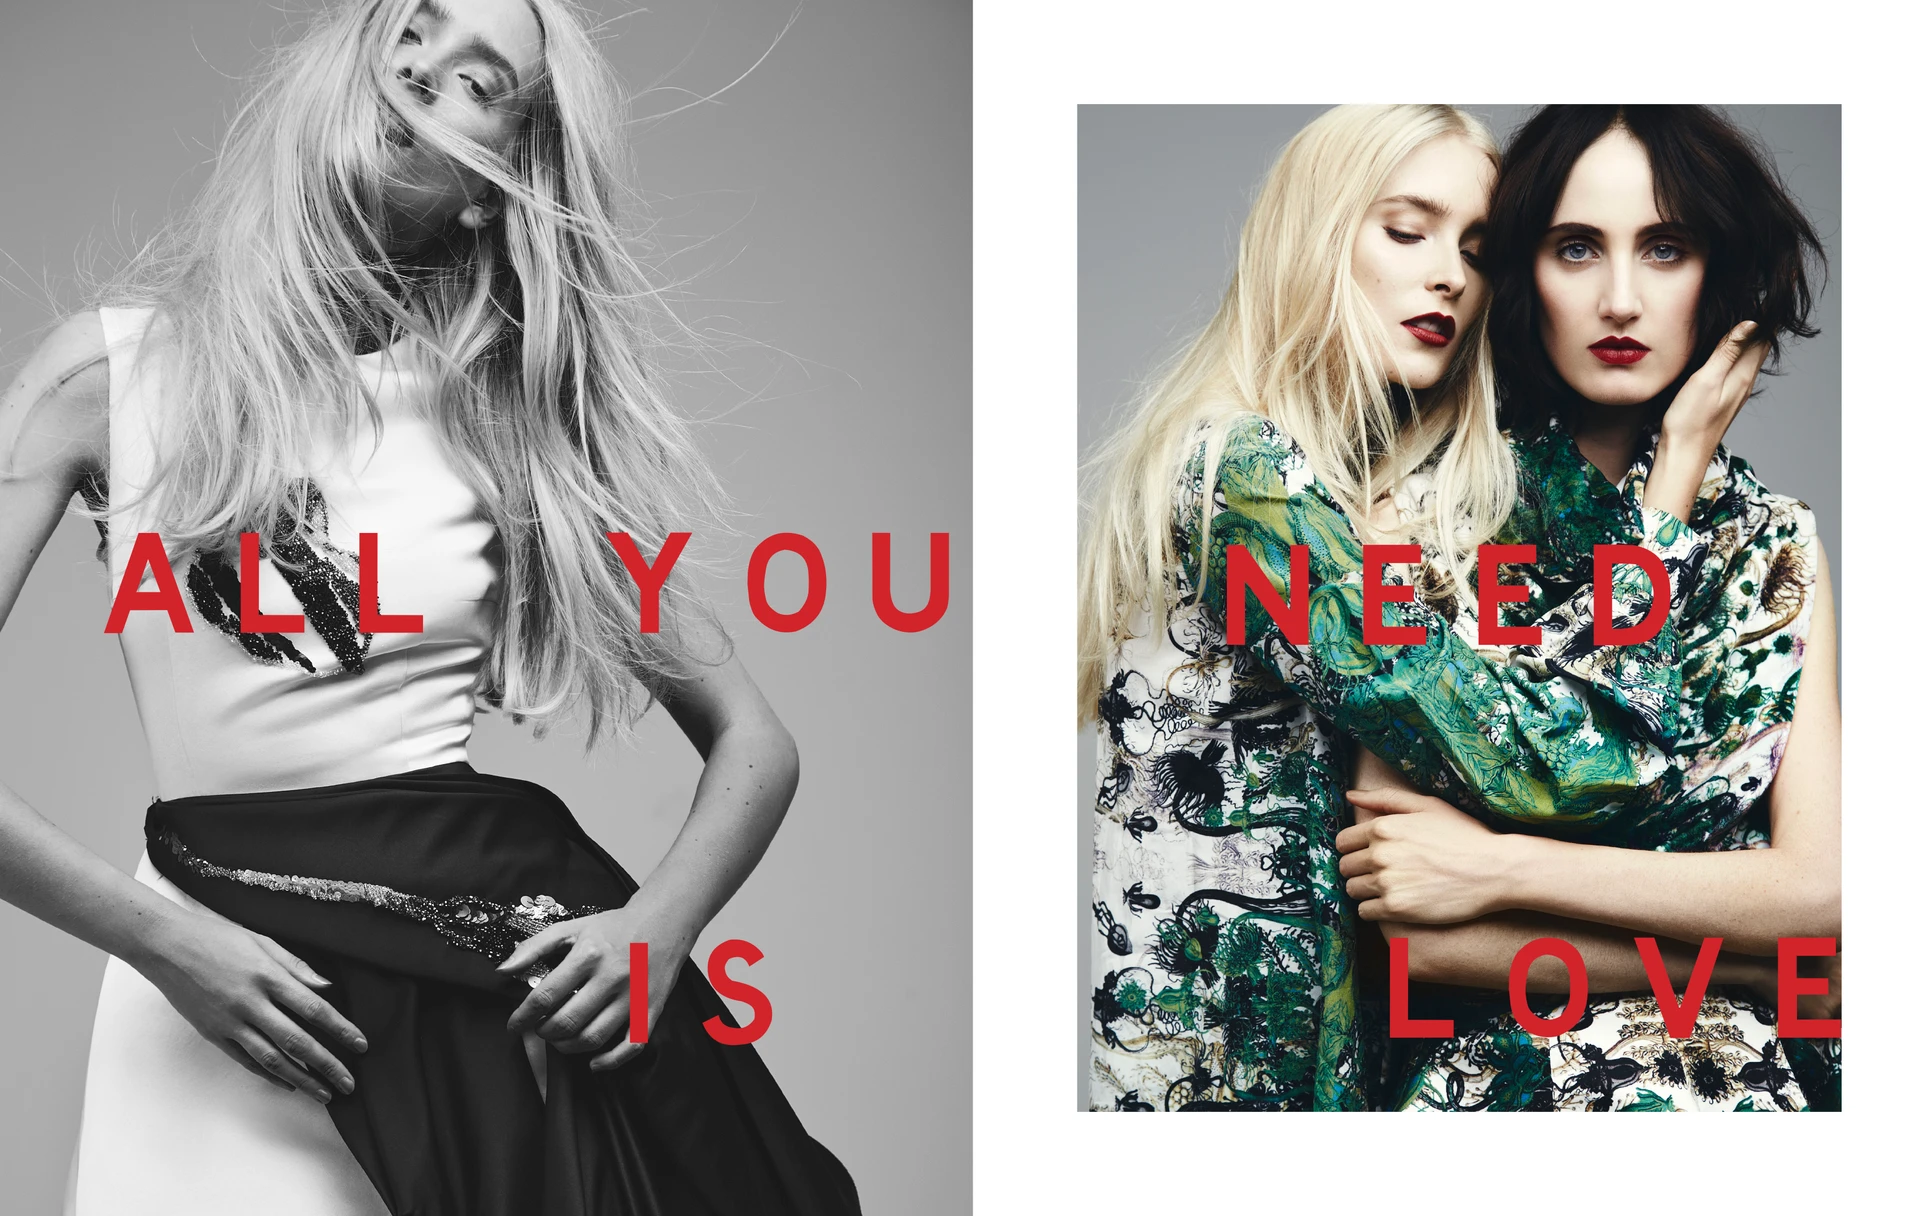 Black and white photo of a woman with long hair in motion and a white top; adjacent image of two women closely posing, one with blonde hair and the other with dark hair, both wearing vibrant patterned outfits. Text overlay: 'ALL YOU NEED IS LOVE'.